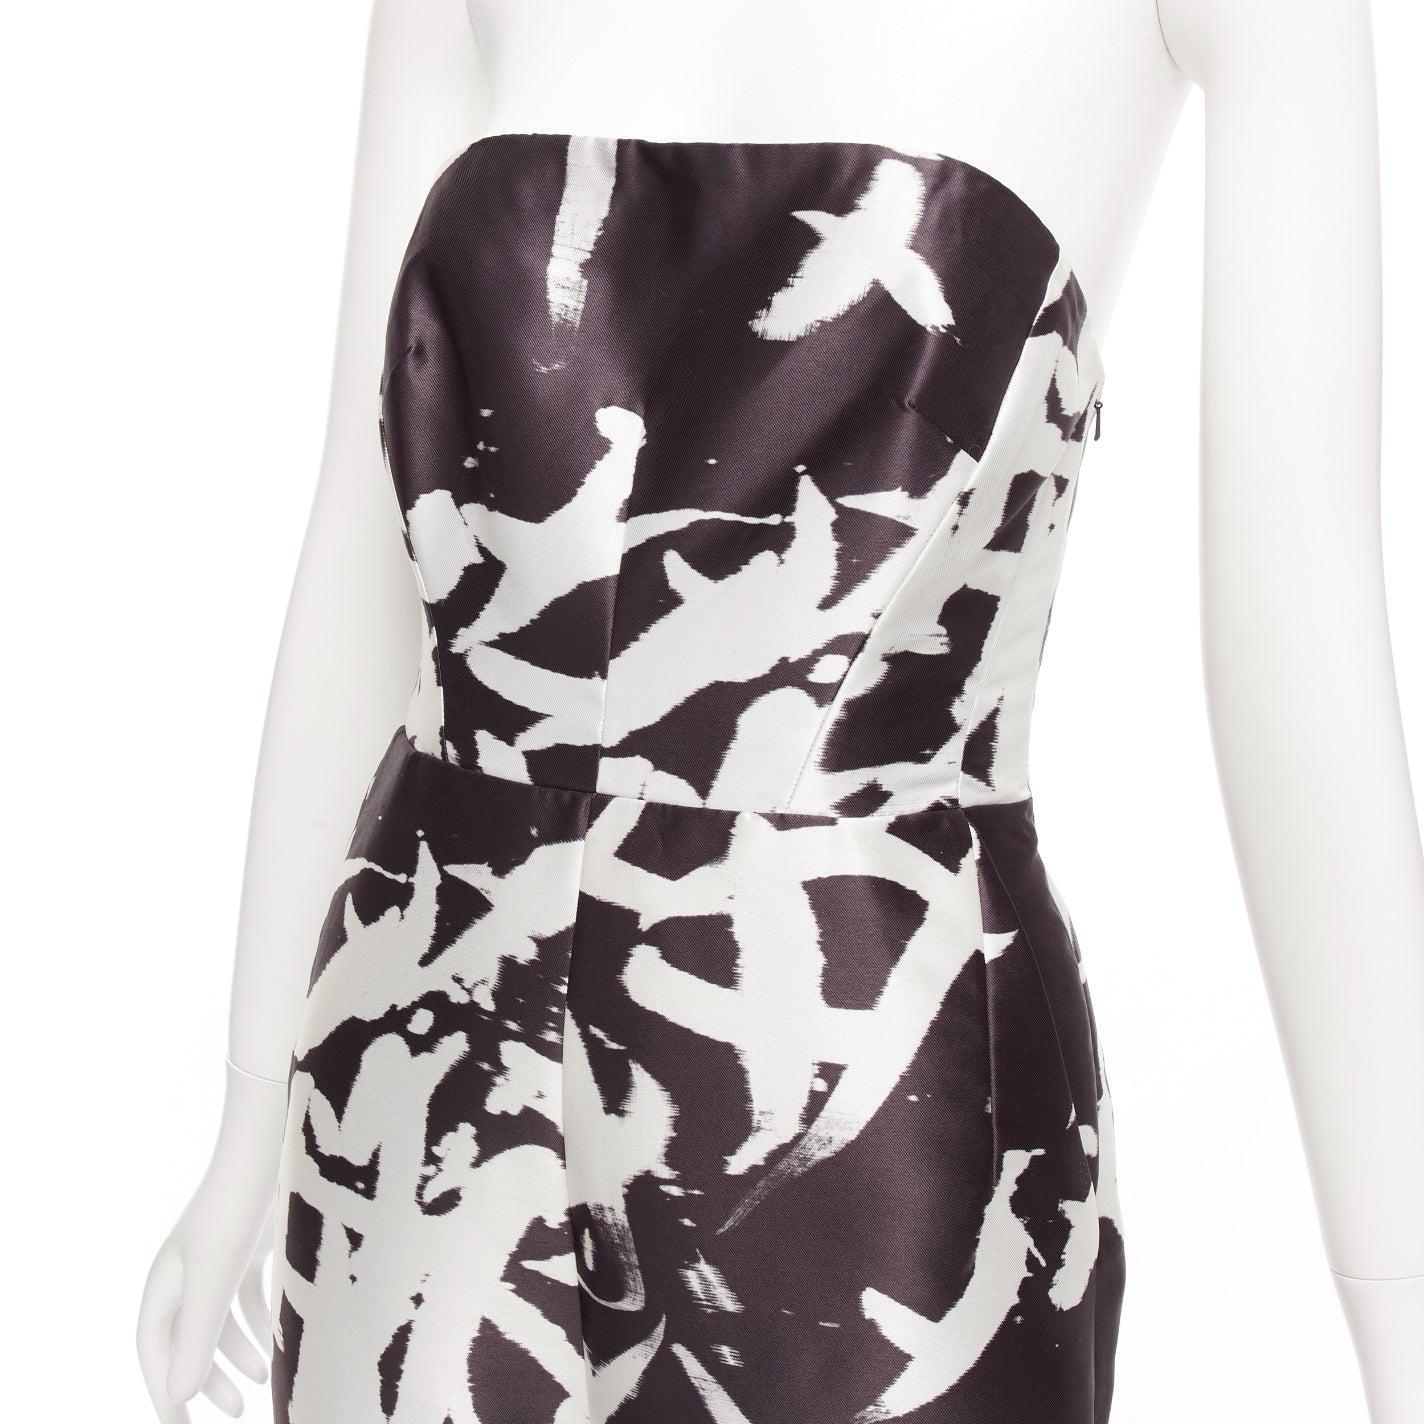 WHISTLES black white abstract print strapless back cut out wide jumpsuit UK10 M
Reference: NKLL/A00190
Brand: Whistles
Material: Polyester
Color: Black, White
Pattern: Abstract
Closure: Zip
Lining: Black Polyester
Extra Details: Back zip with cut